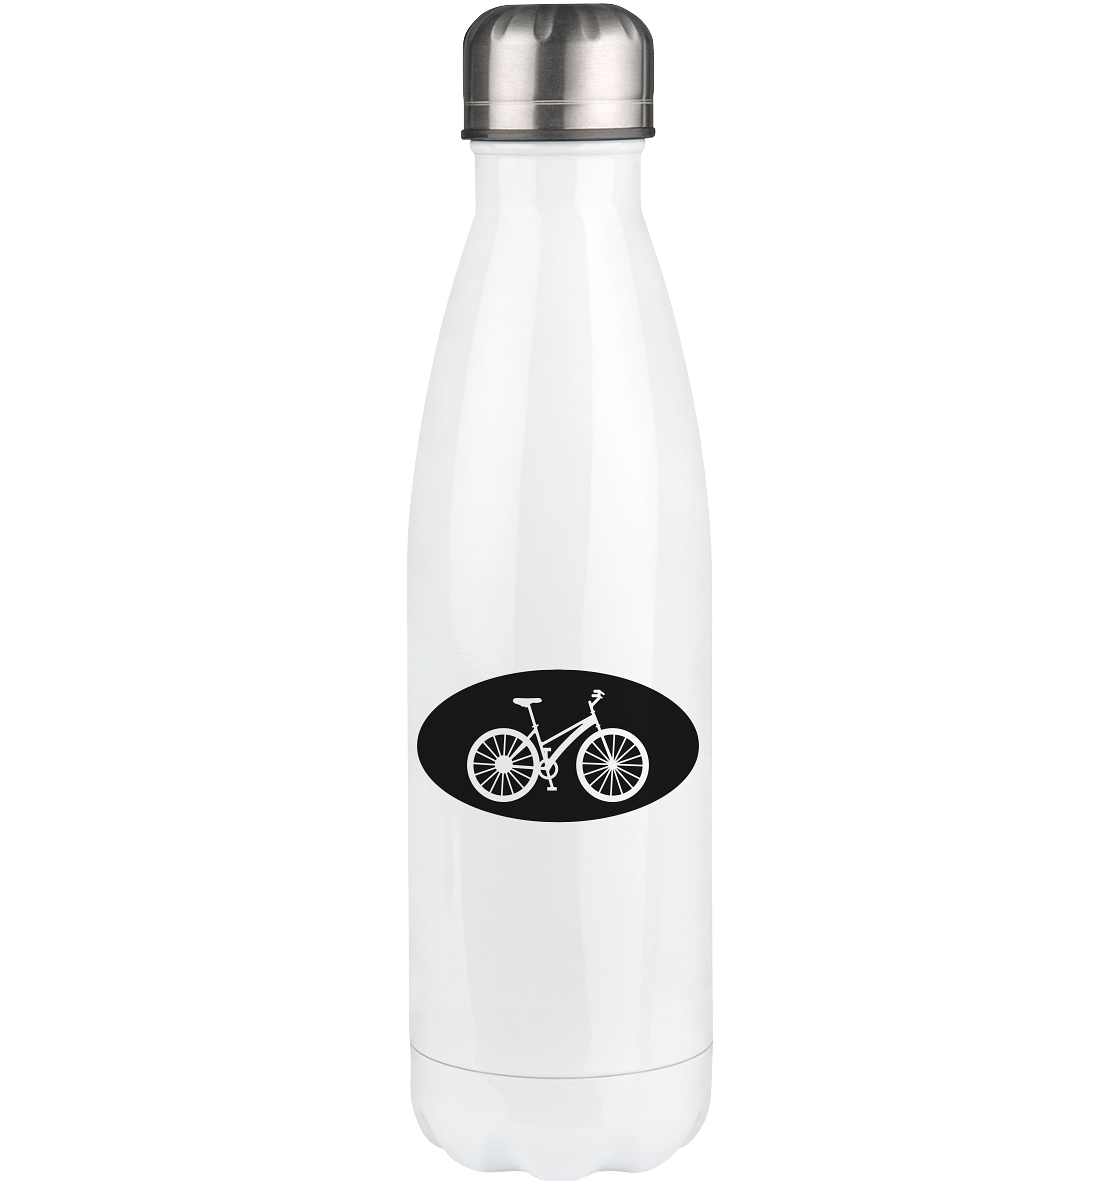 Semicircle and Bicycle - Edelstahl Thermosflasche fahrrad 500ml